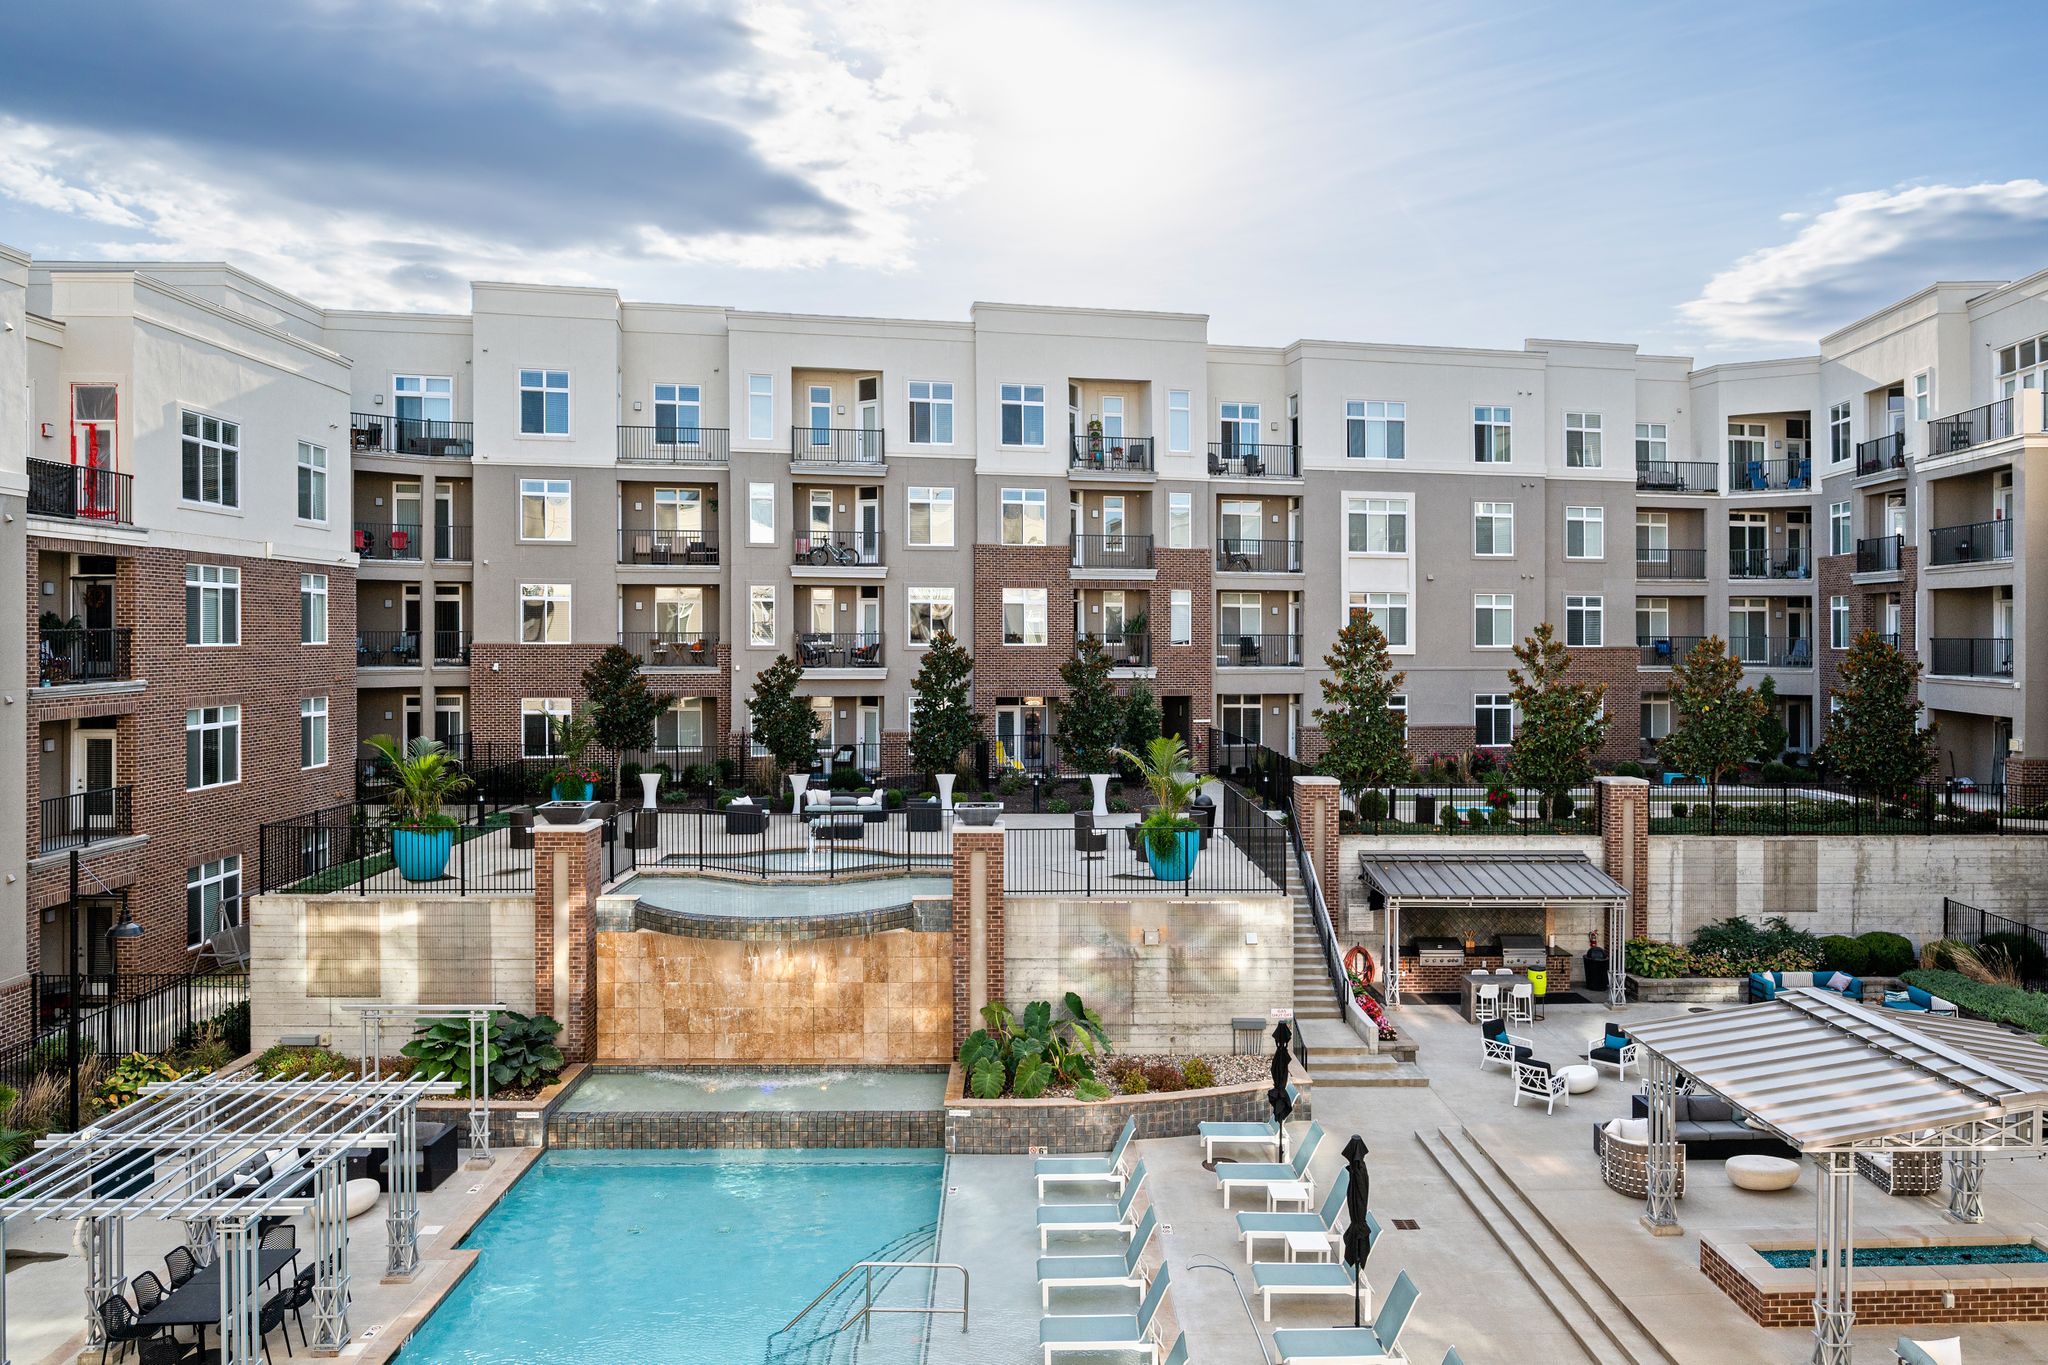 At the Center of Domain City Center is it's Luxurious Pools, Grills, and Lounging Areas